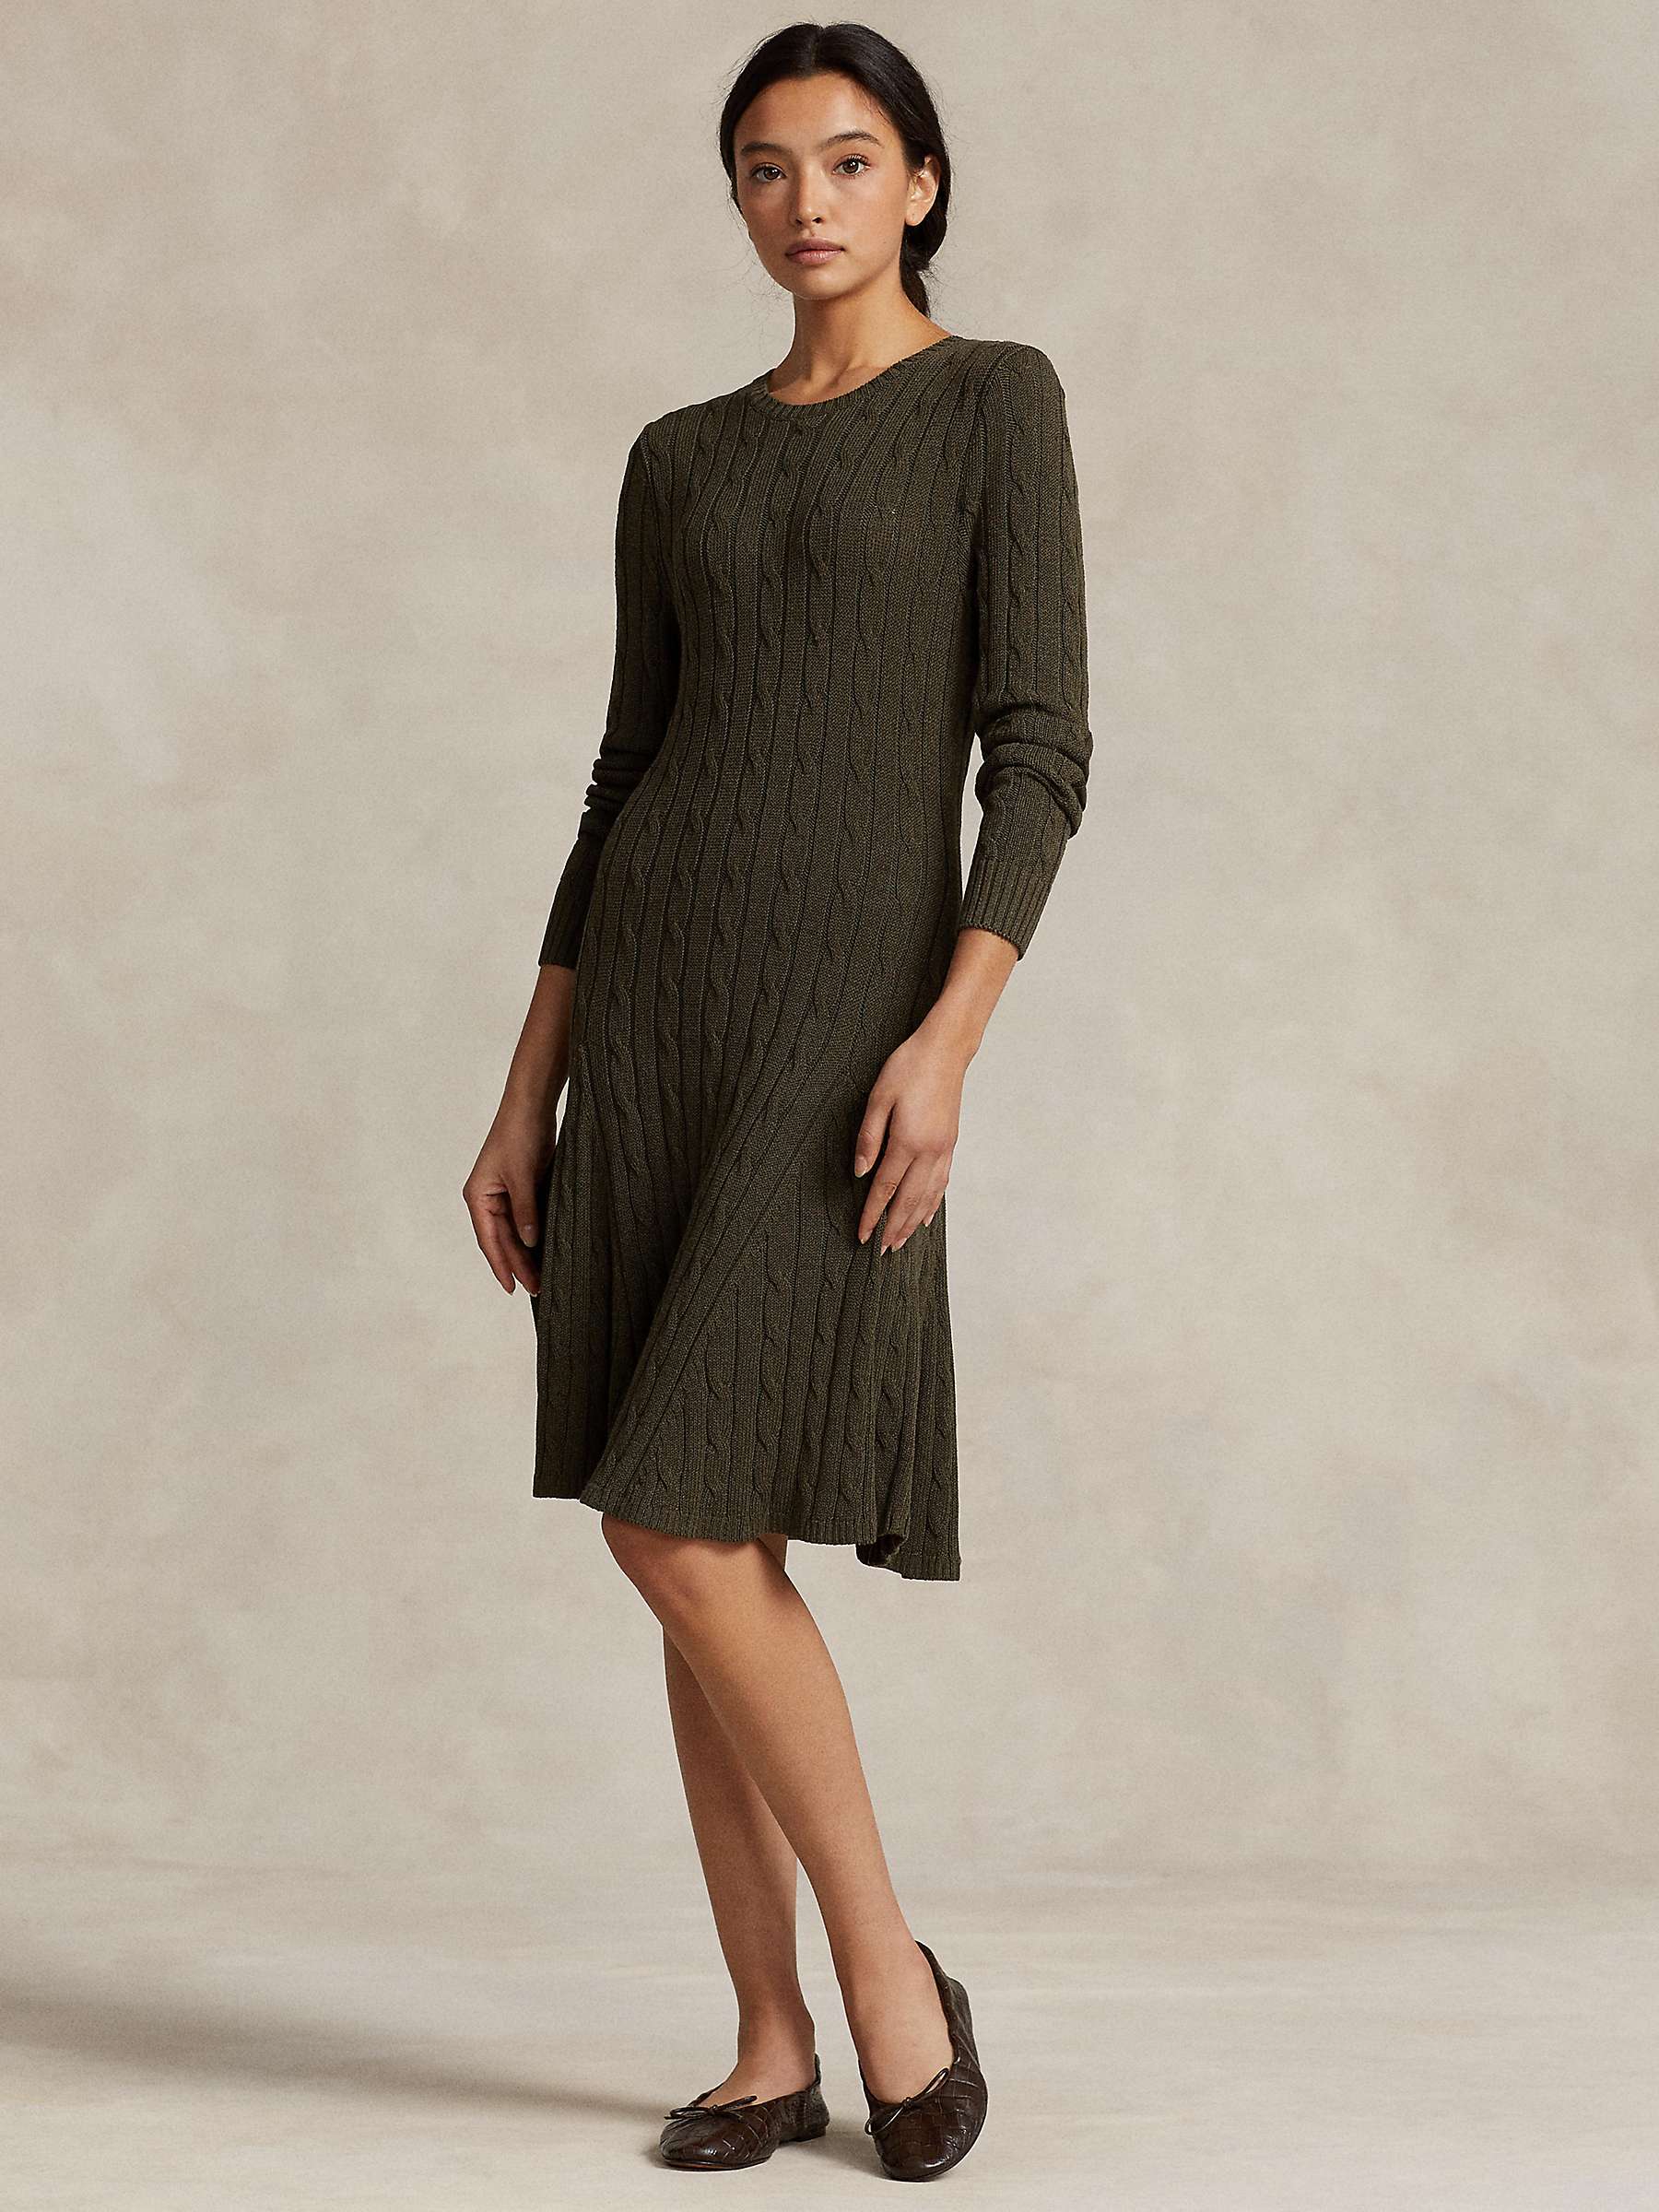 Buy Polo Ralph Lauren Cable Knit Flared Jumper Dress, Khaki Online at johnlewis.com